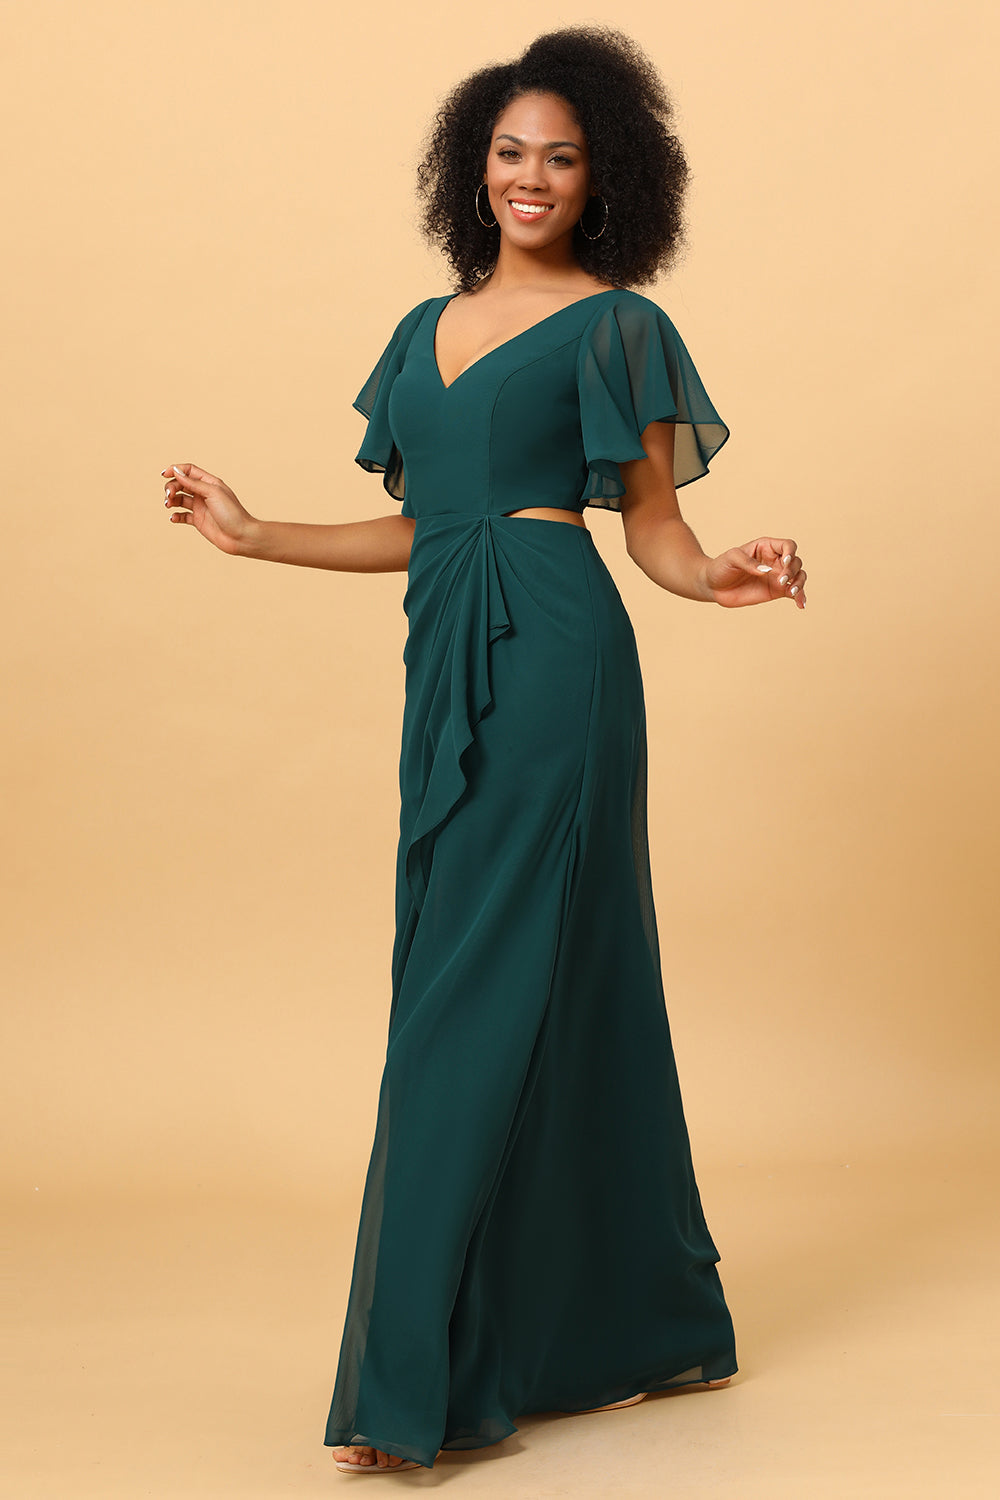 Hollow-out Chiffon Green Bridesmaid Dress with Ruffles Sleeves